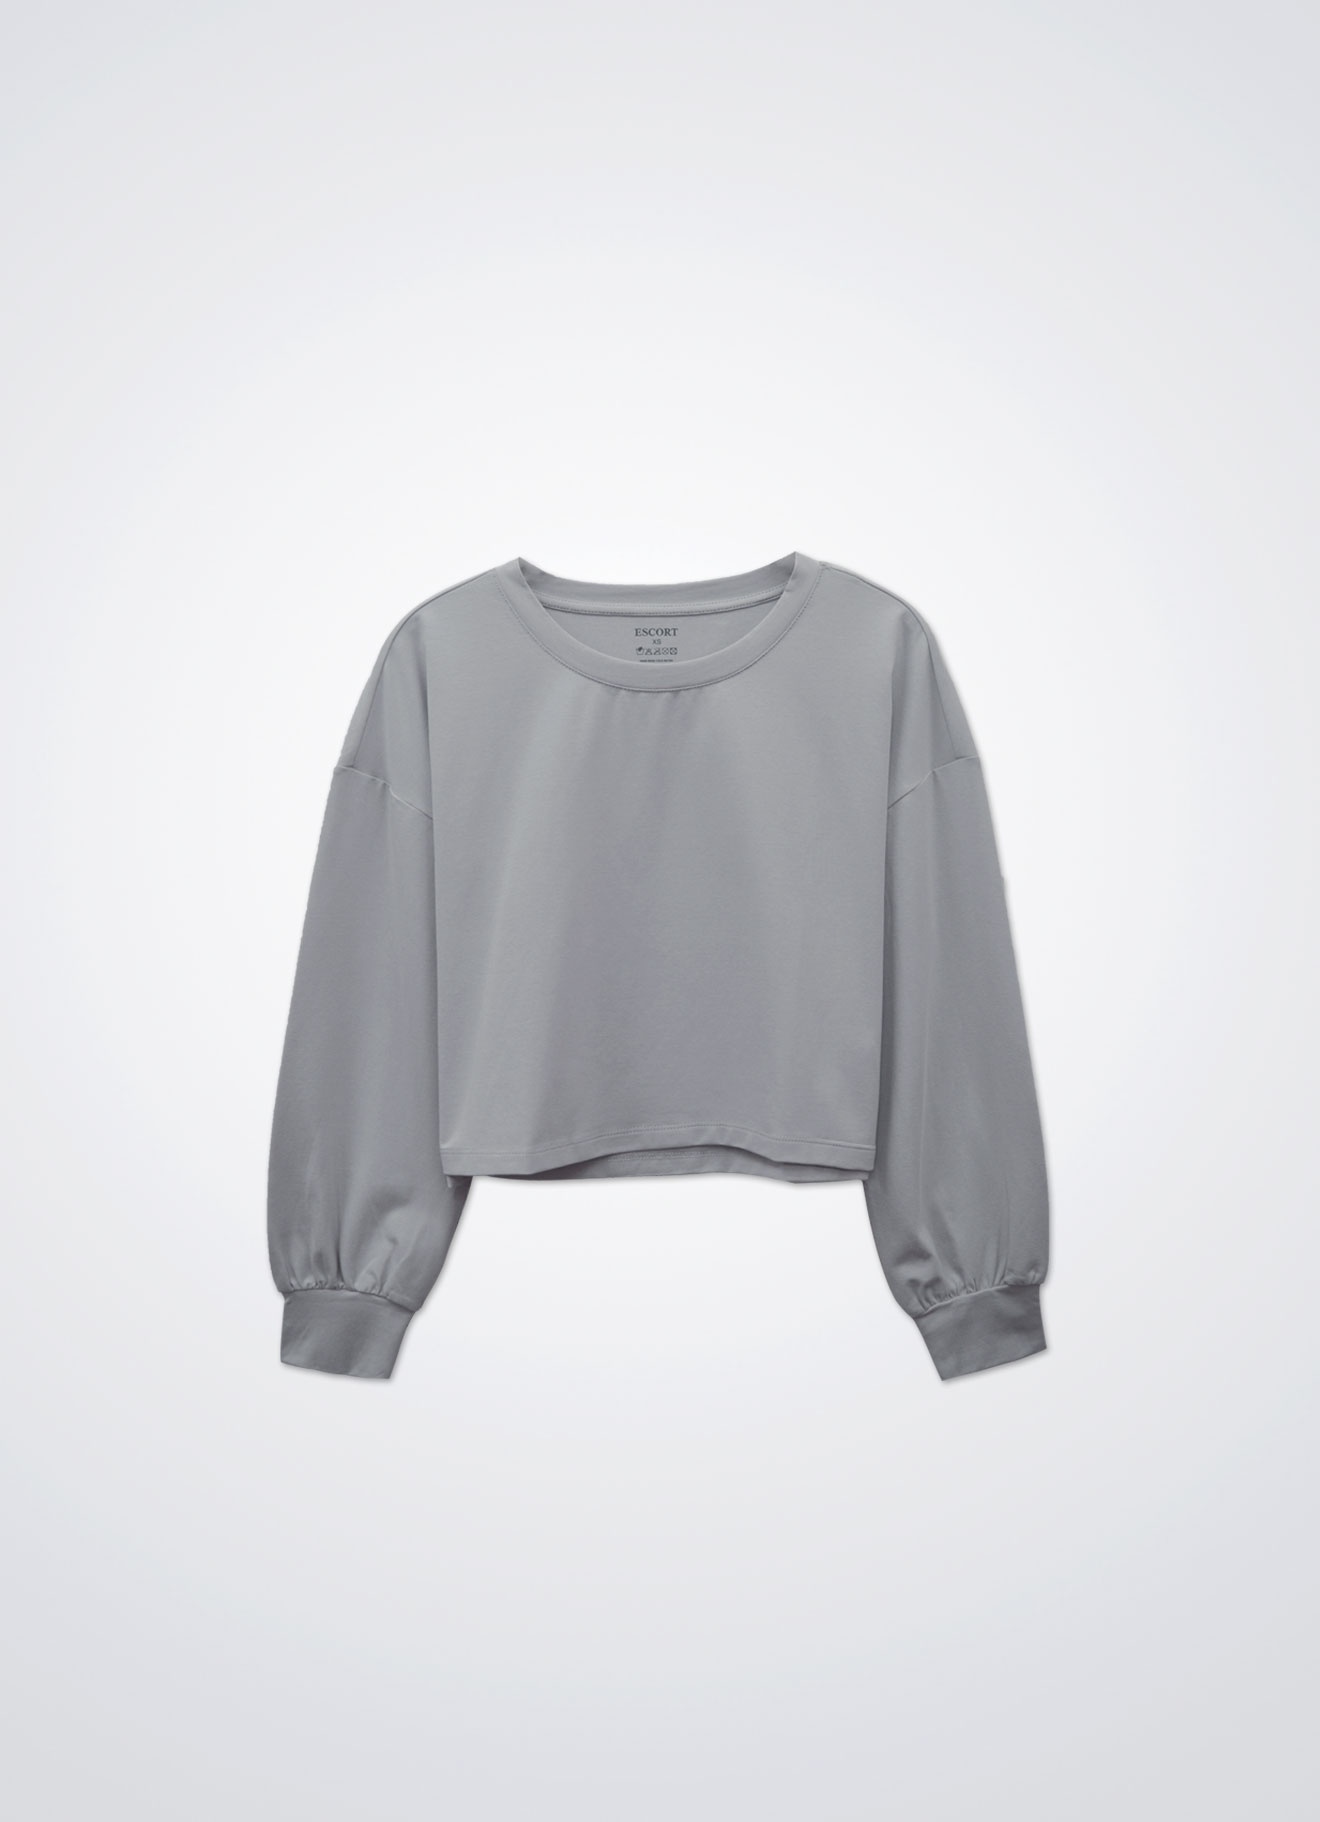 White-Sand by Long Sleeve Top